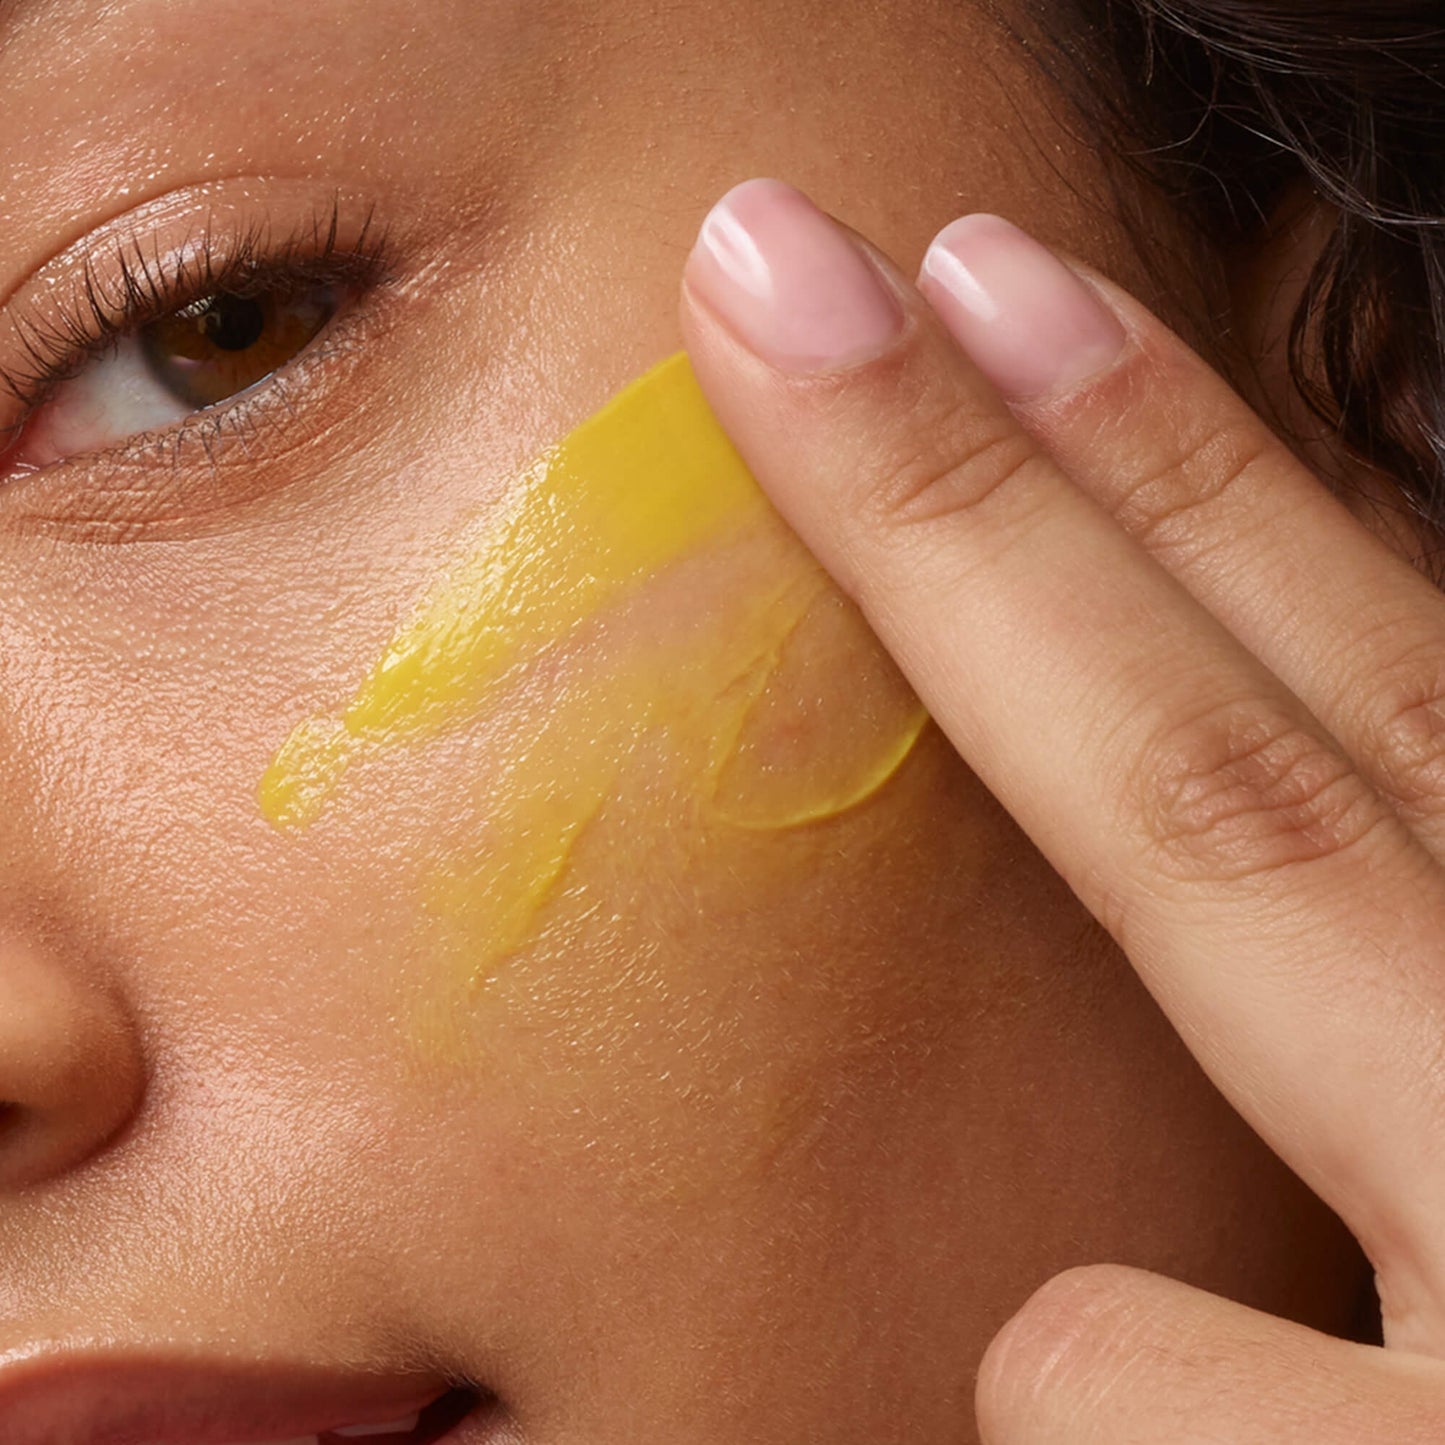 Face model applying C.E.O. Afterglow Brightening Vitamin C Cream to her face